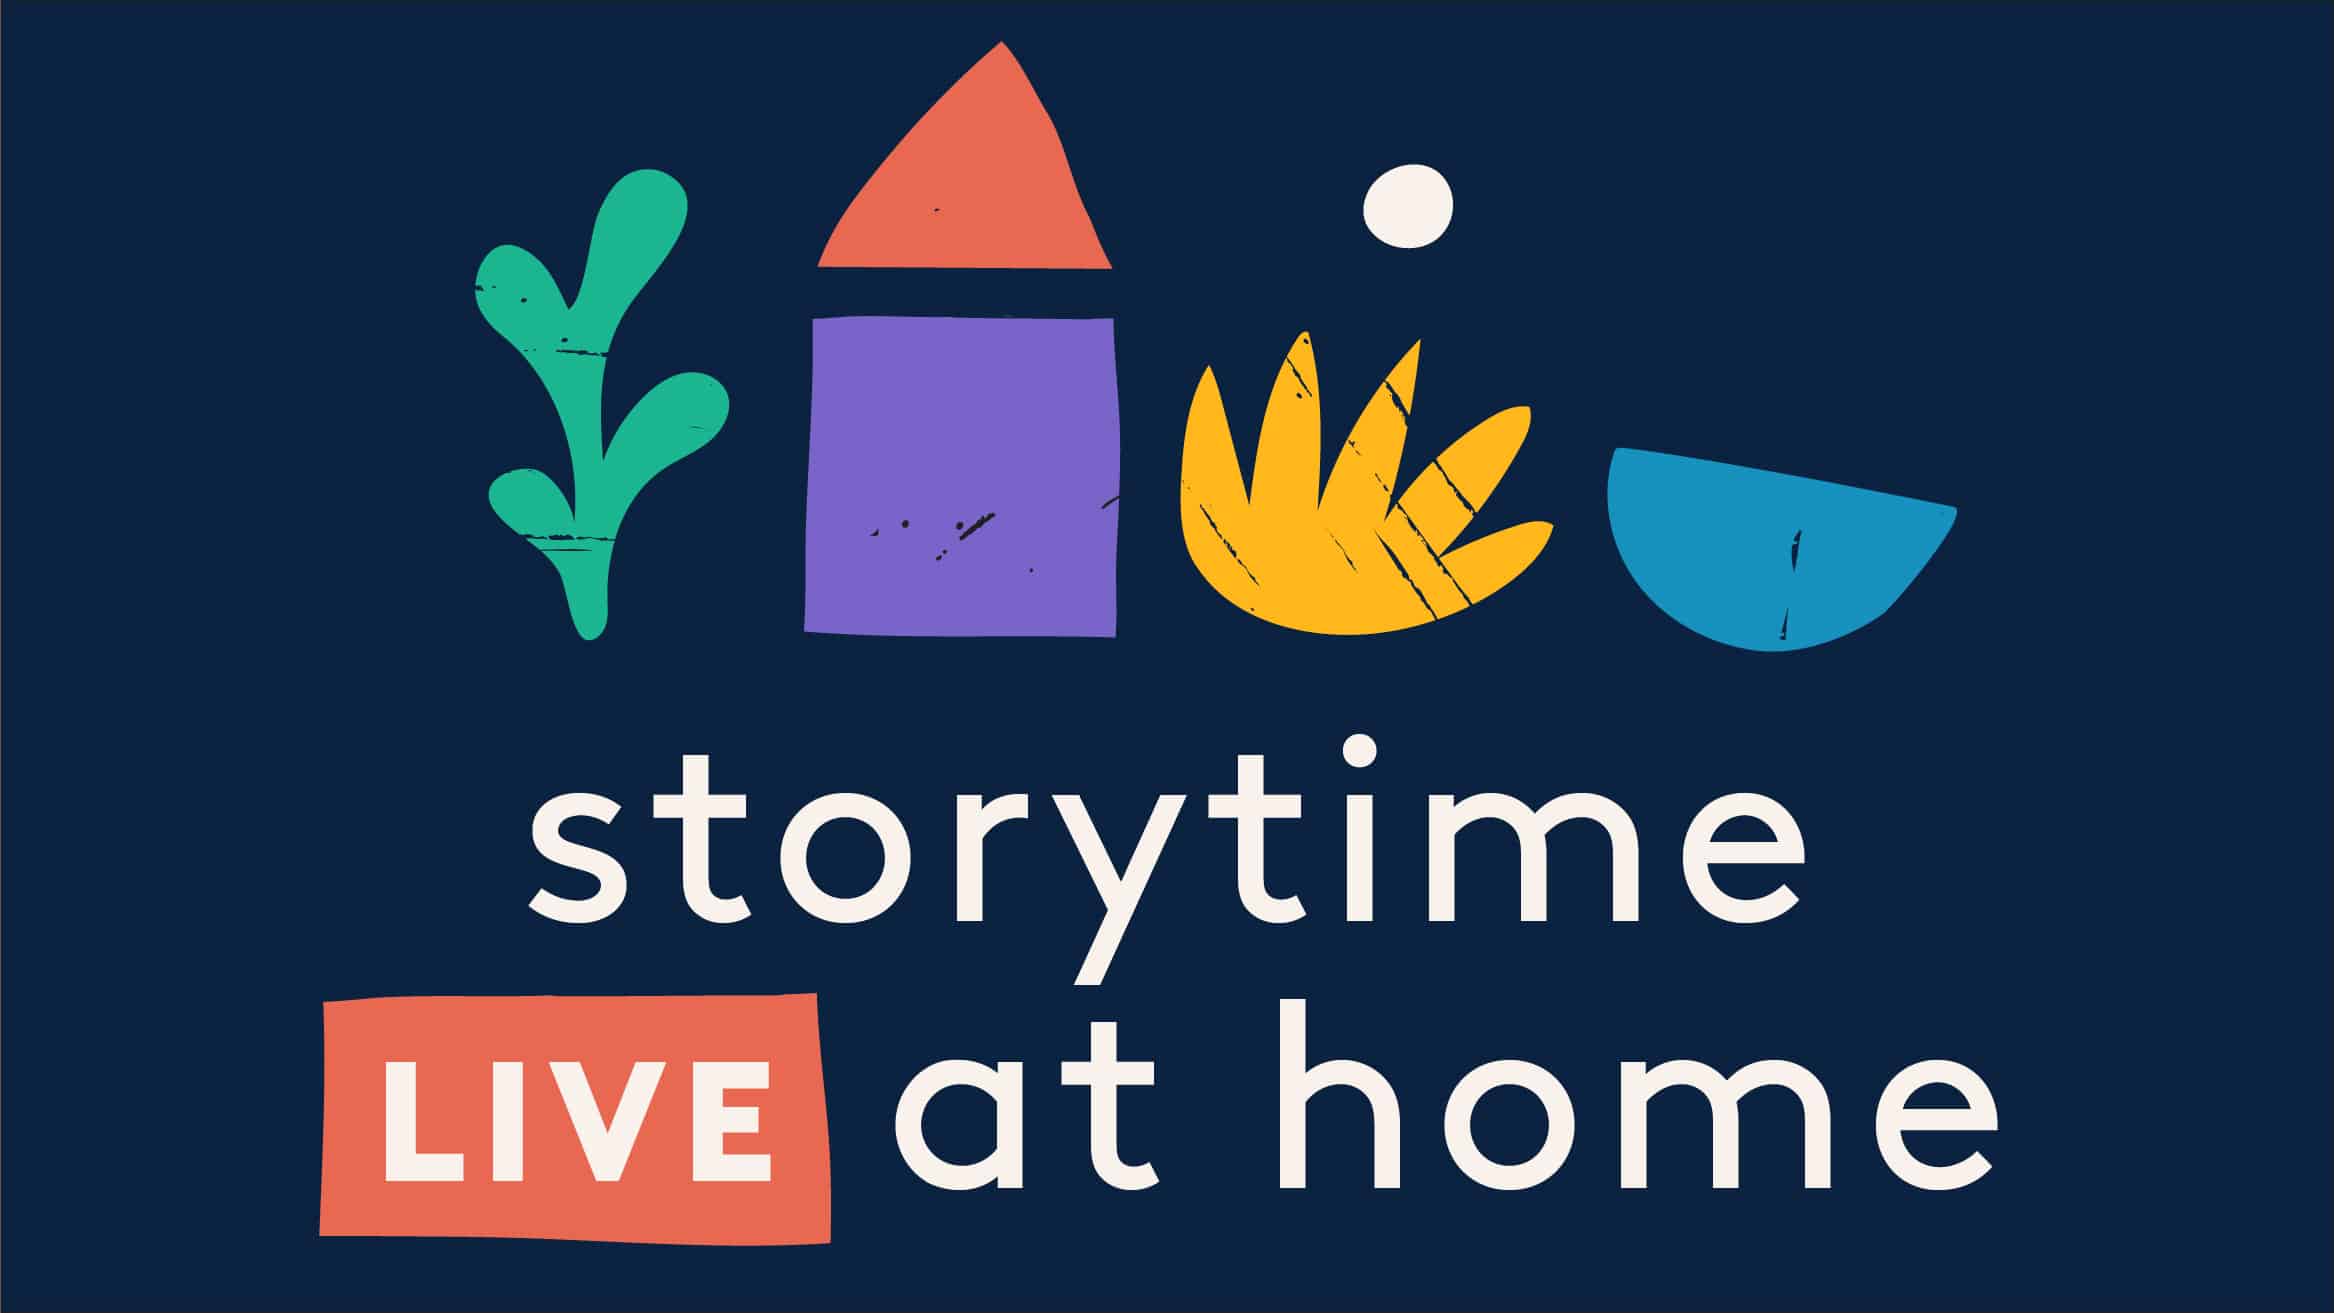 website-storytime-live-at-home-01